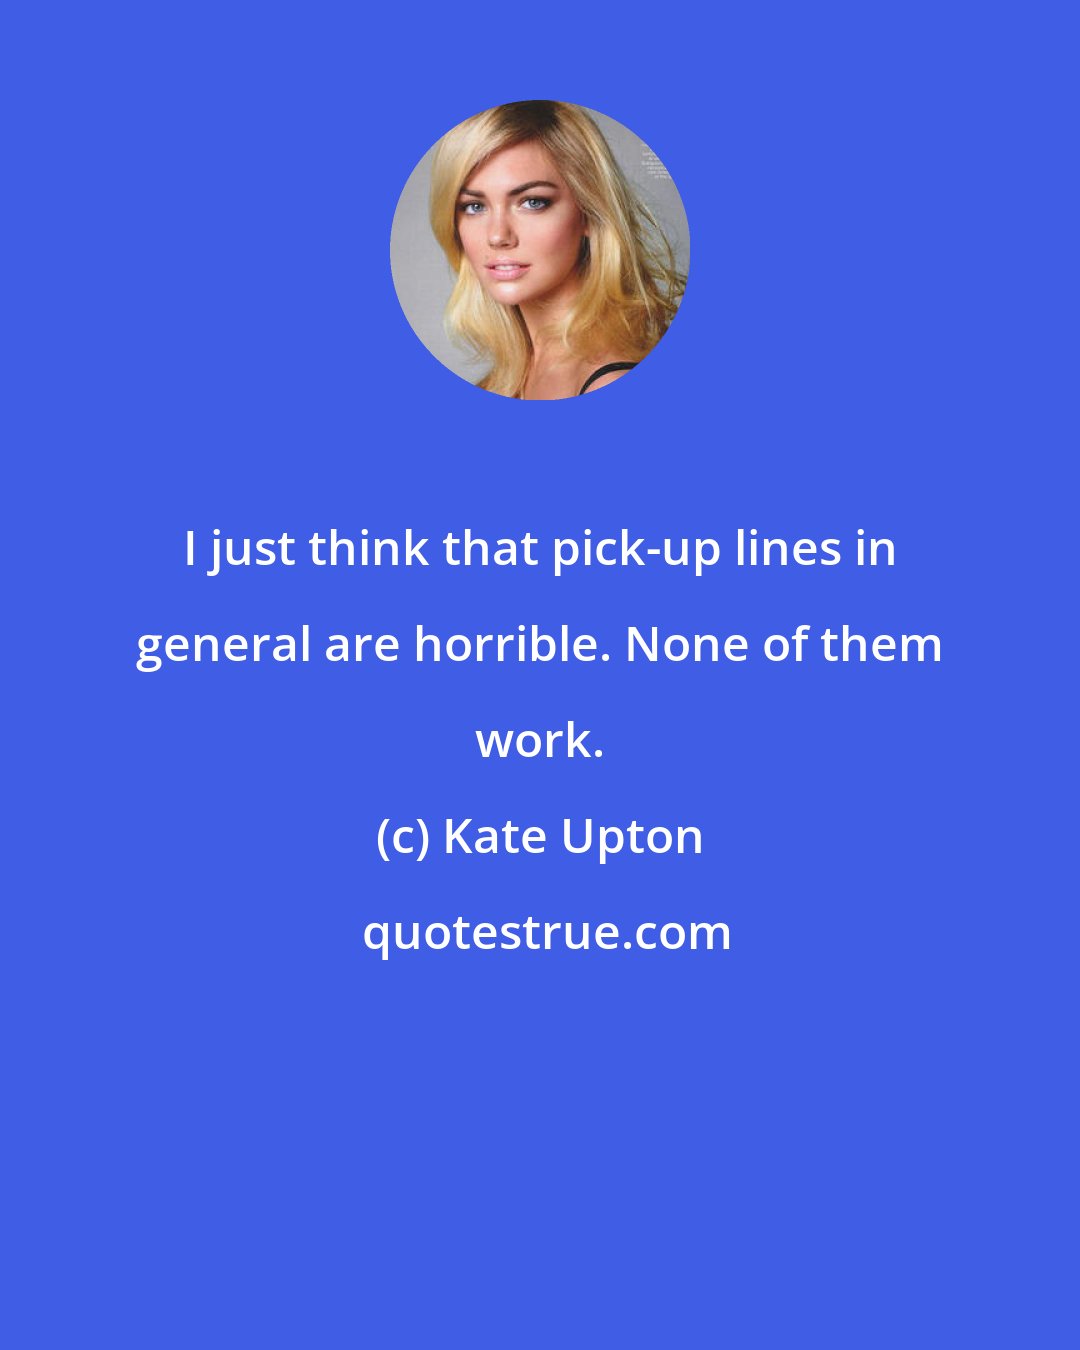 Kate Upton: I just think that pick-up lines in general are horrible. None of them work.